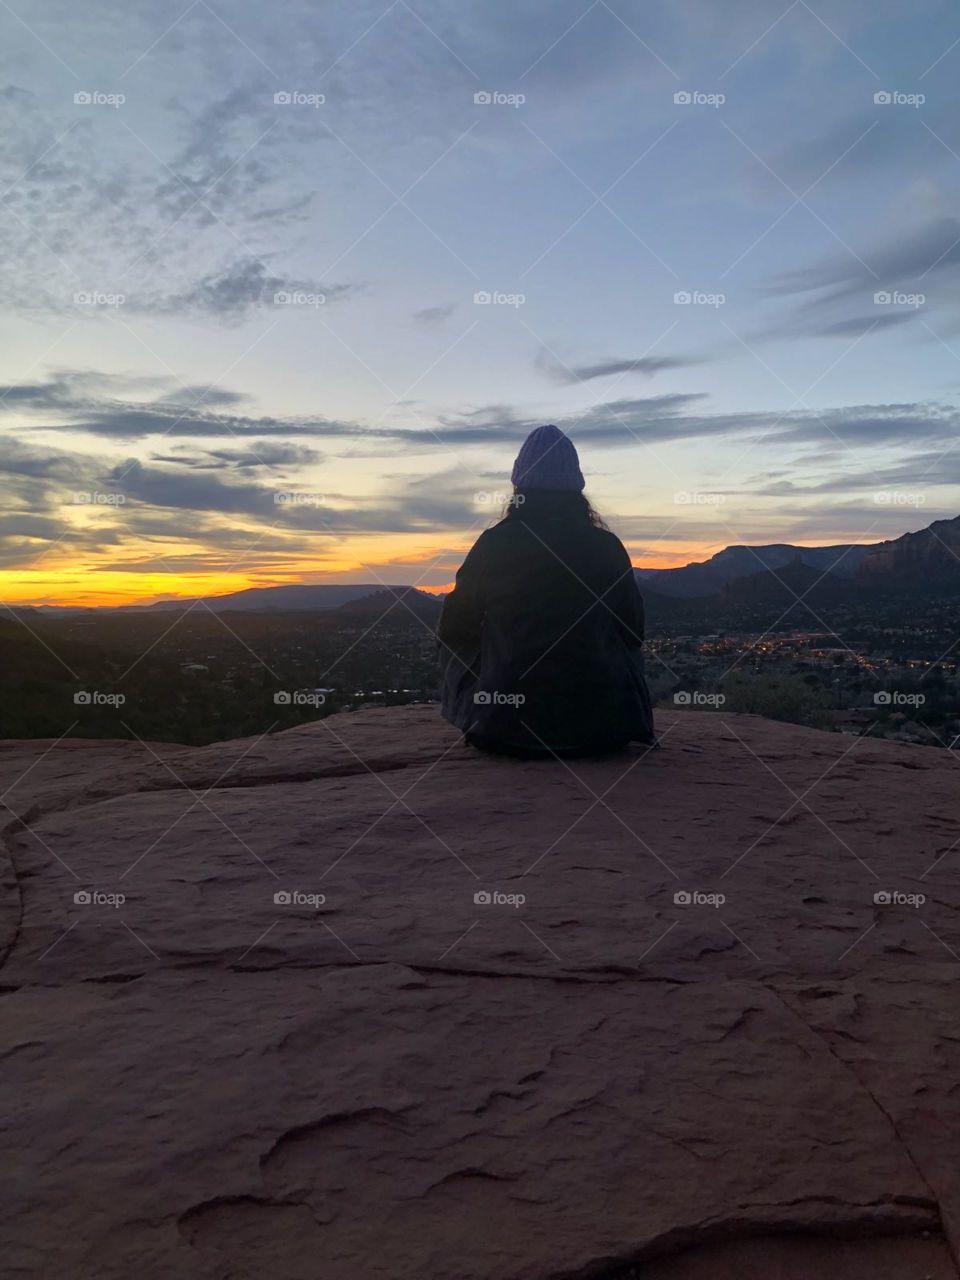 Sunsets and meditation go hand in hand.